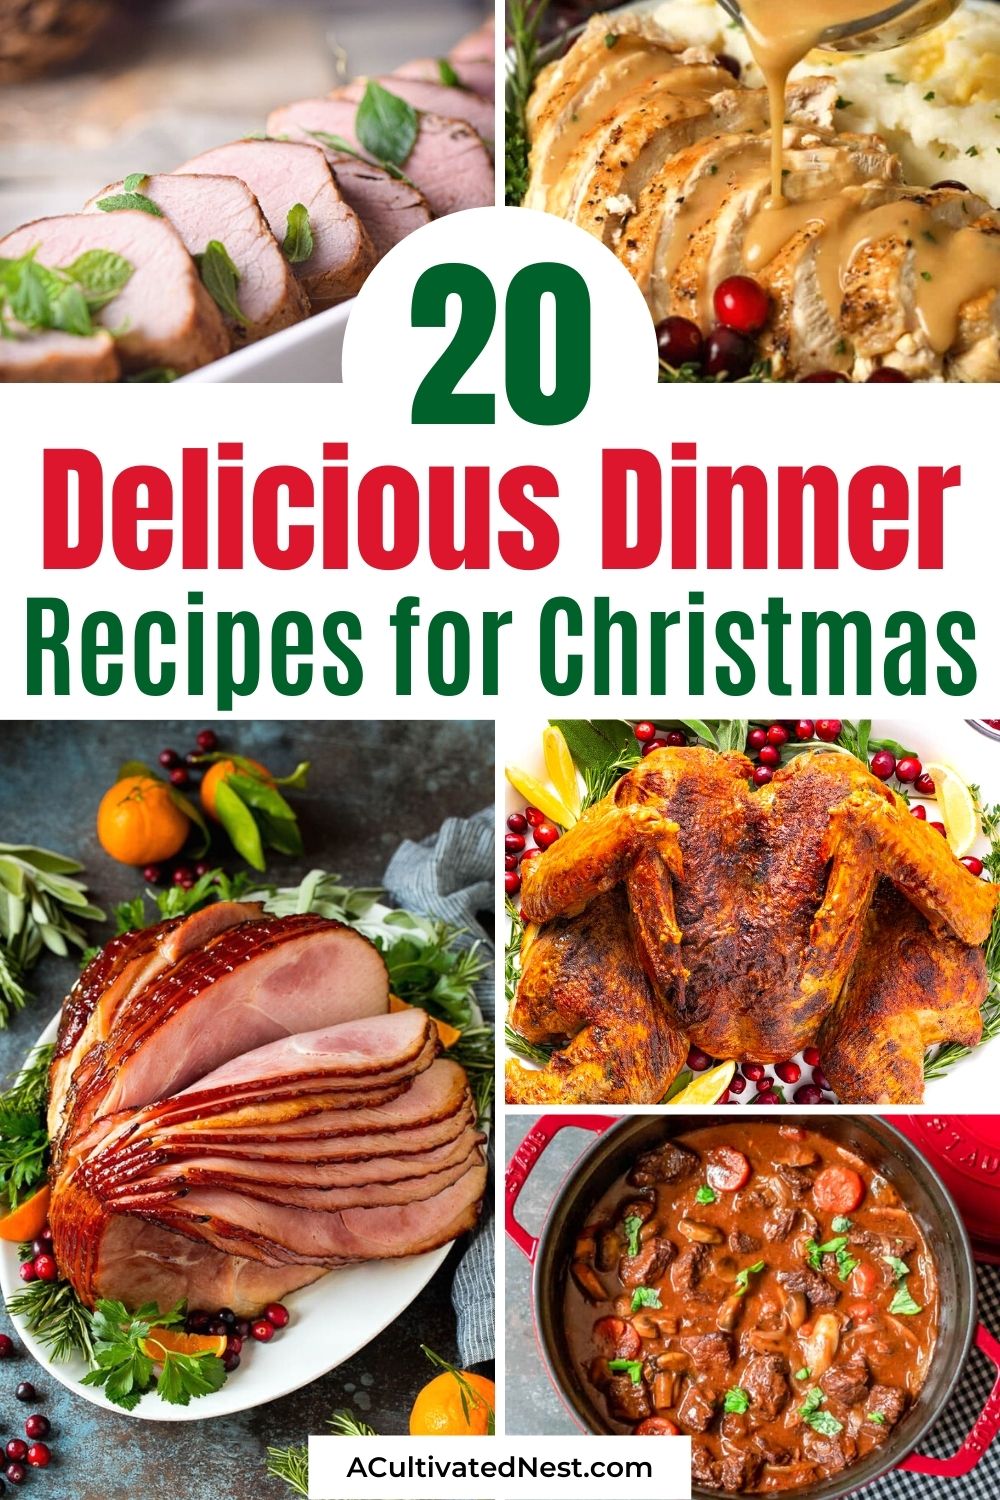 20 Delicious Christmas Dinner Recipes- If you're looking for a new tasty dish to serve for Christmas this year, then you have to check out these delicious Christmas dinner recipes! | Christmas turkey recipes, ham recipes, chicken recipes, #ChristmasRecipe #ChristmasDinnerRecipes #turkeyRecipes #hamRecipes #ACultivatedNest